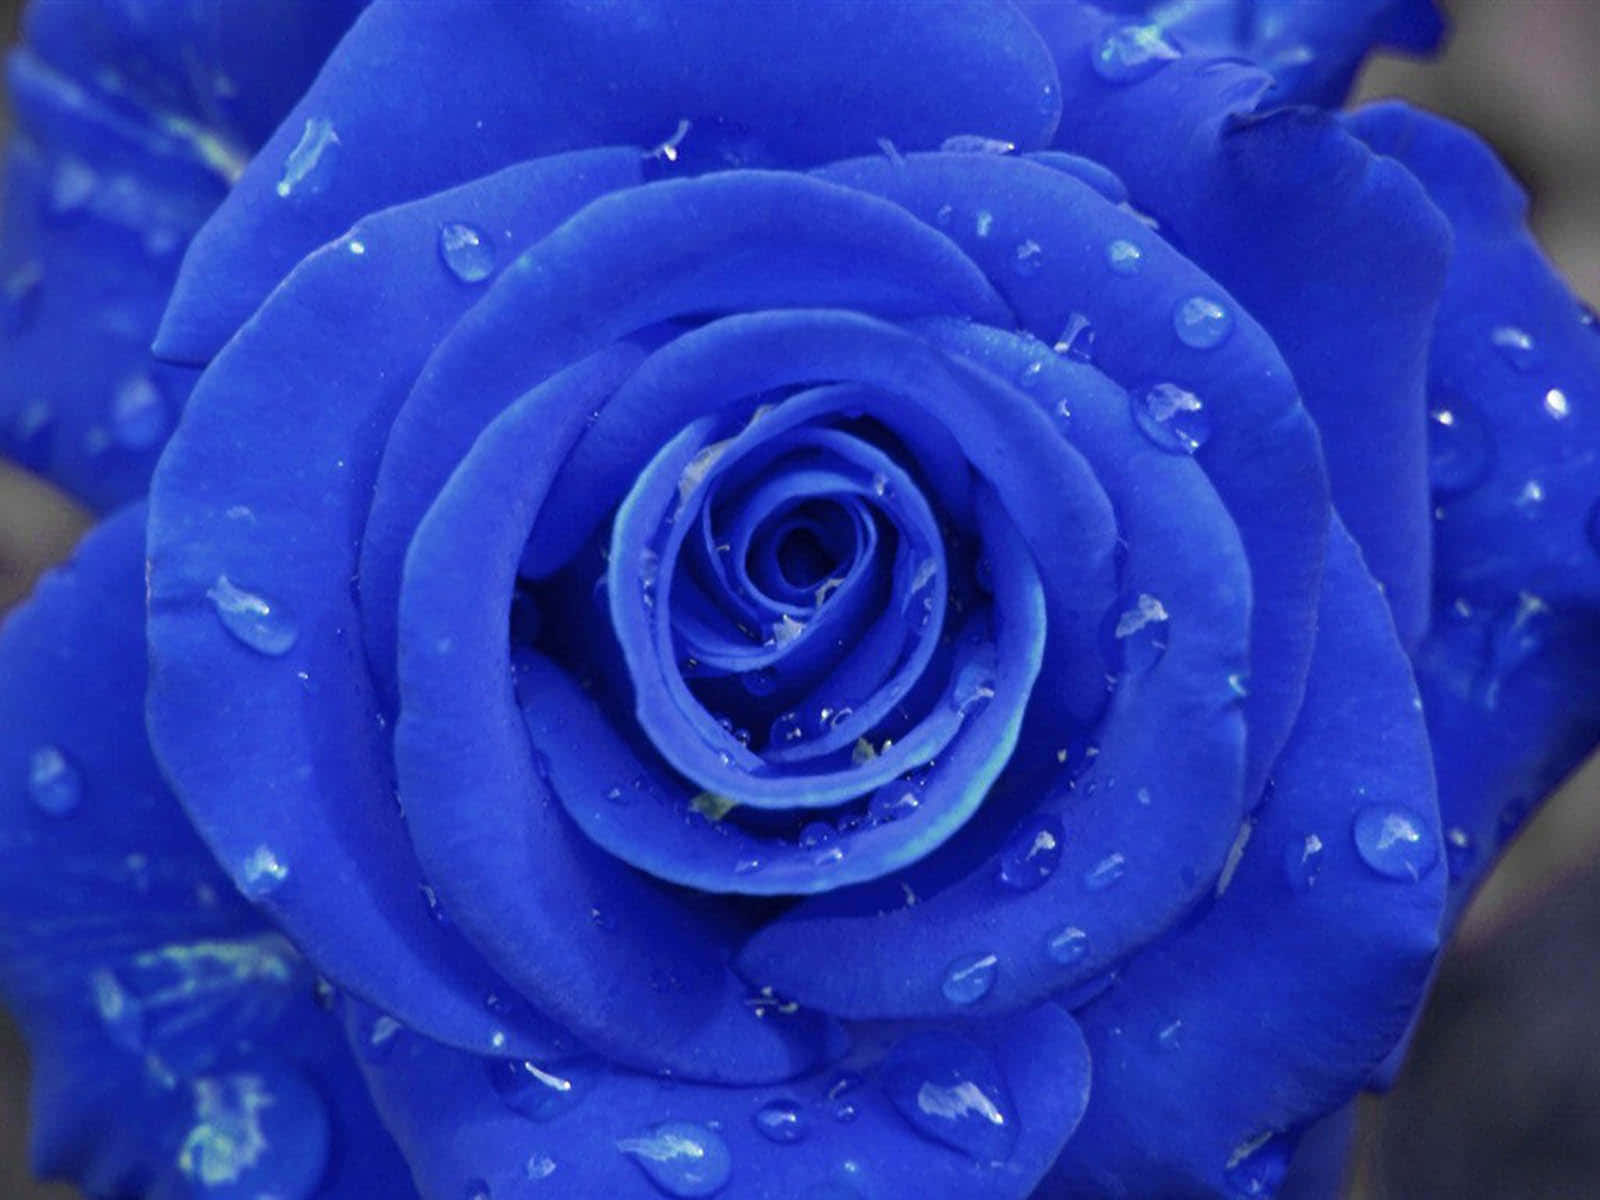 A Blue Rose With Water Droplets On It Wallpaper